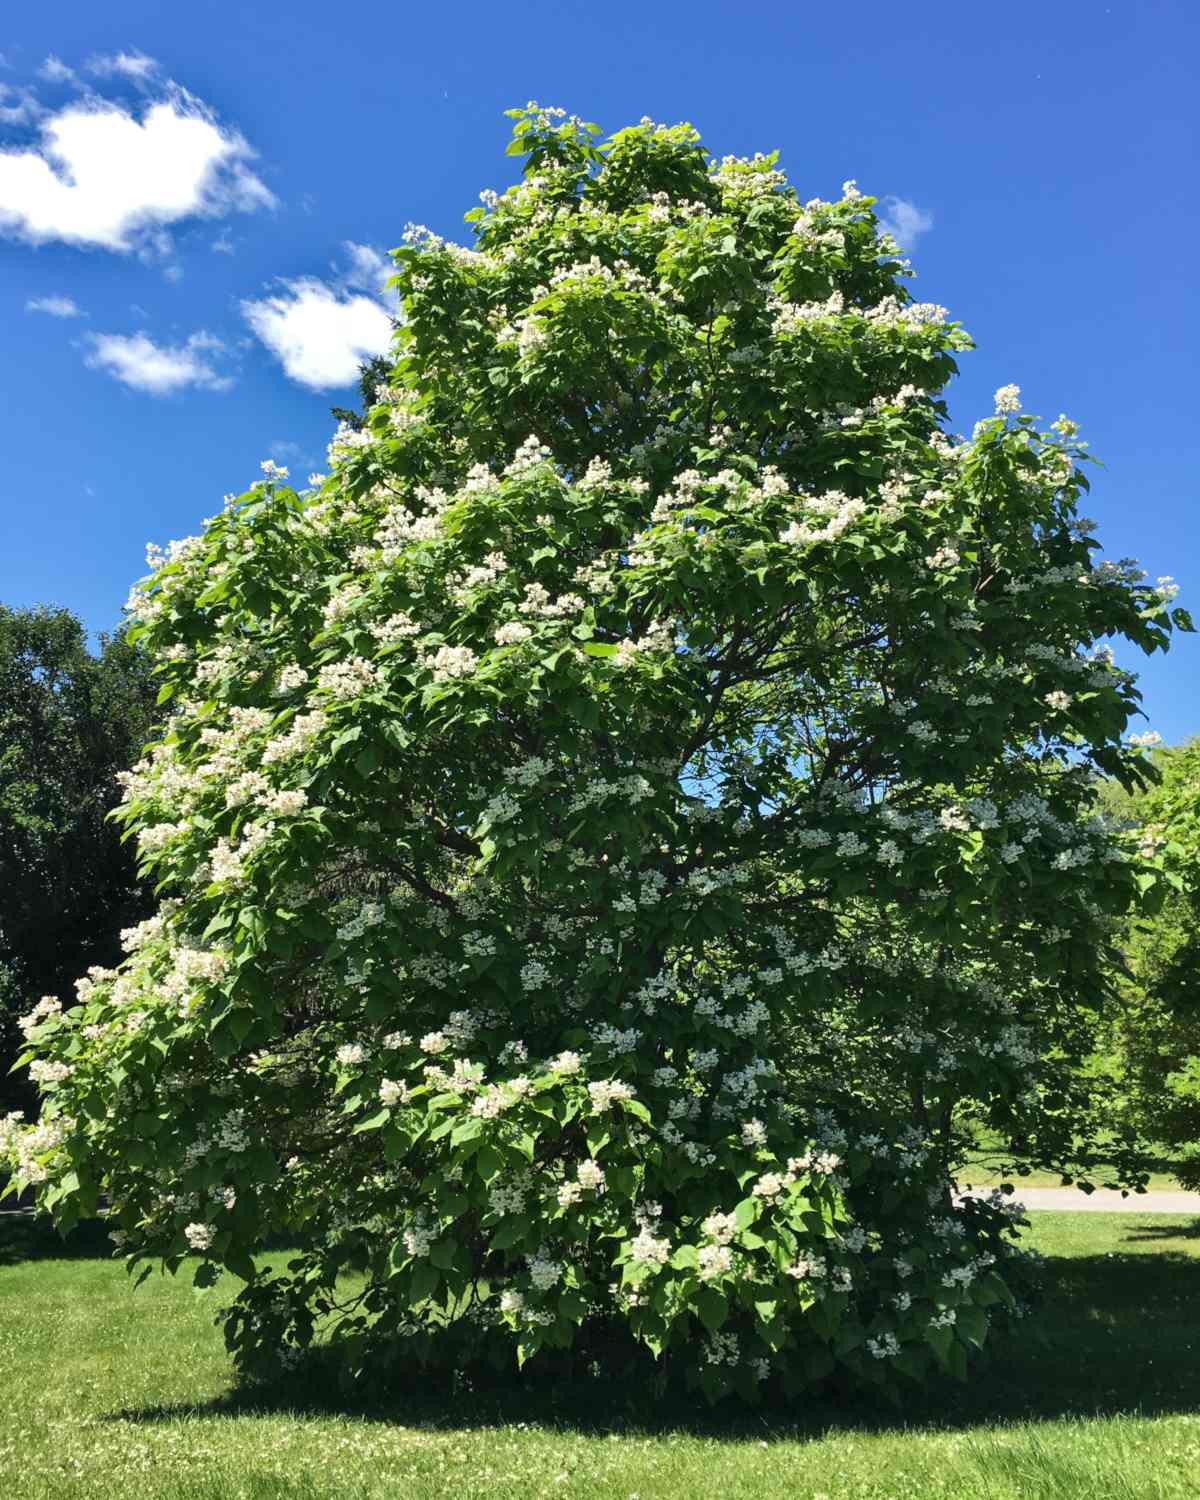 catalpa, a shade tree with amazing orchid-like blooms